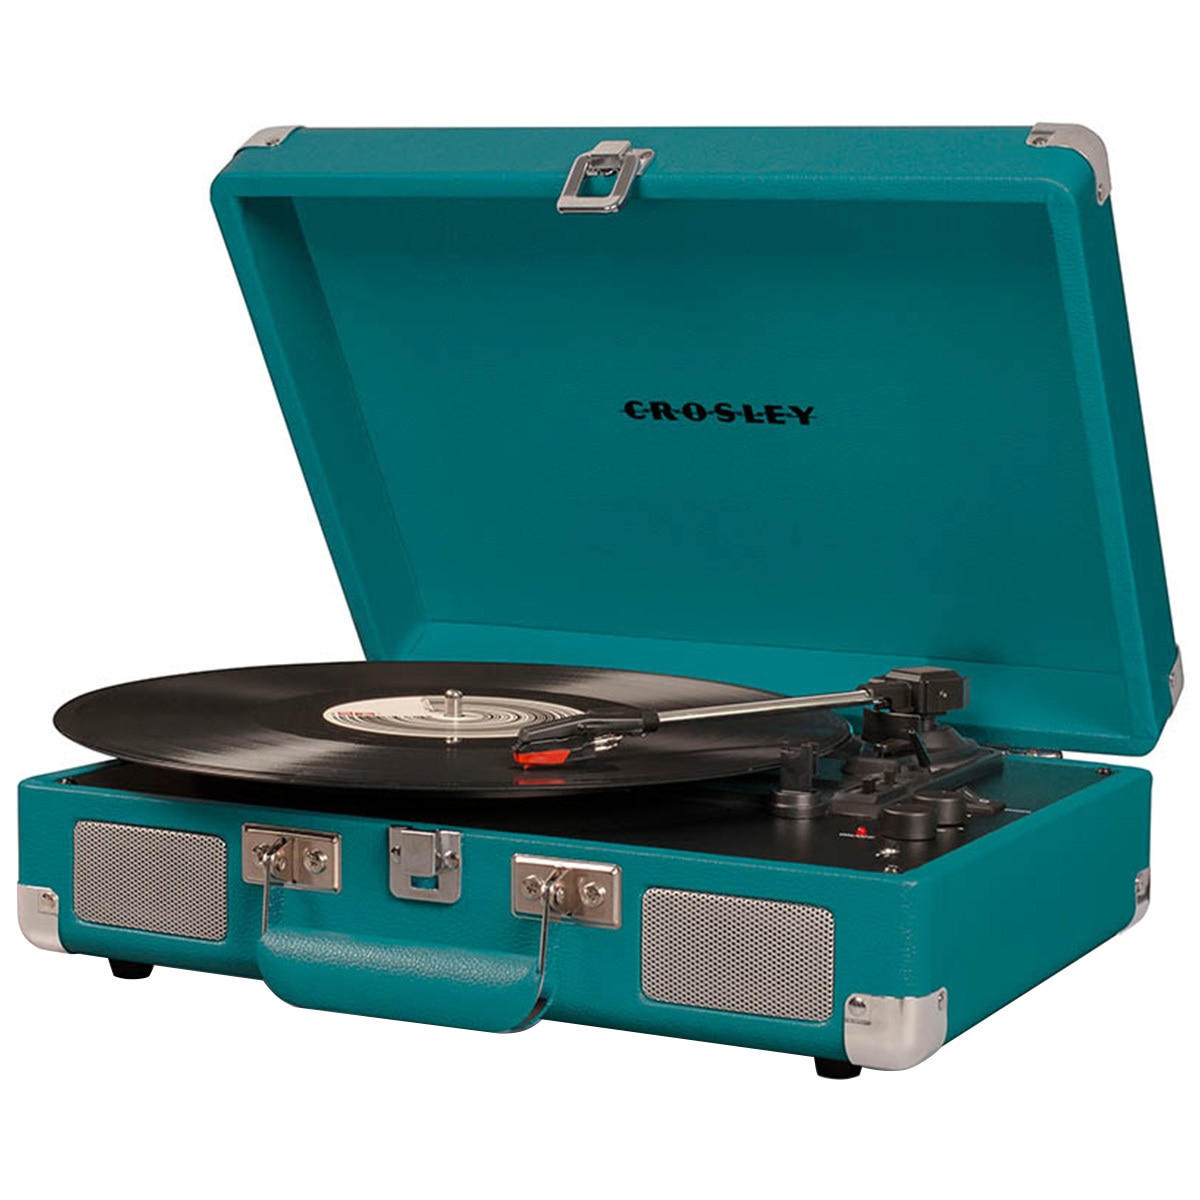 Crosley Cruiser Deluxe Portable Turntable - Teal + Free Record Storage Crate